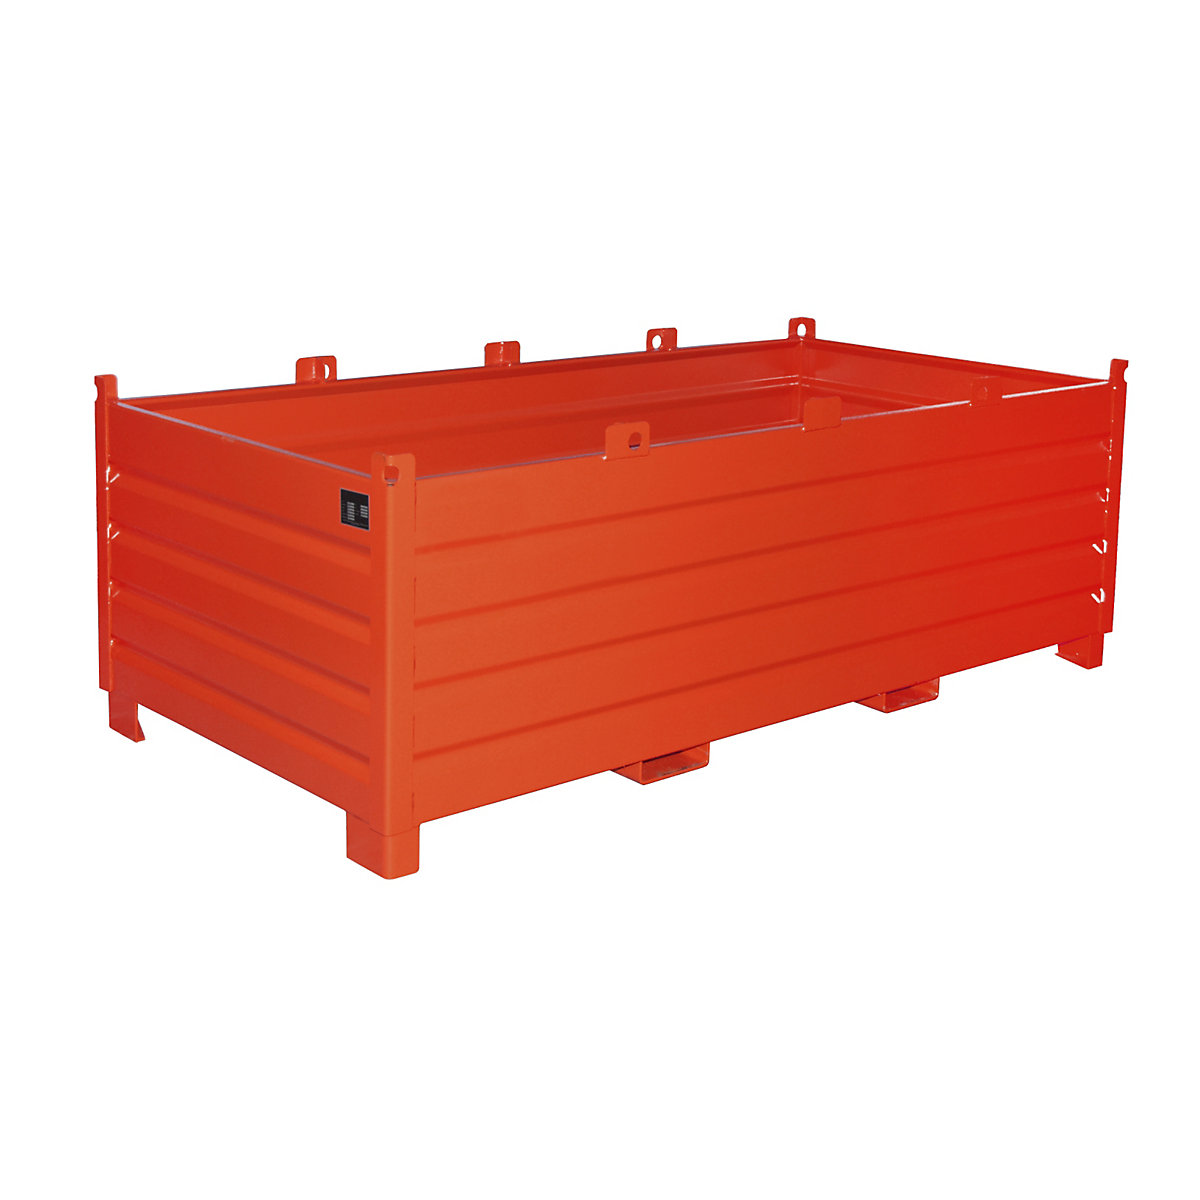 Waste container – eurokraft pro, capacity 2.0 m³, flame red-5